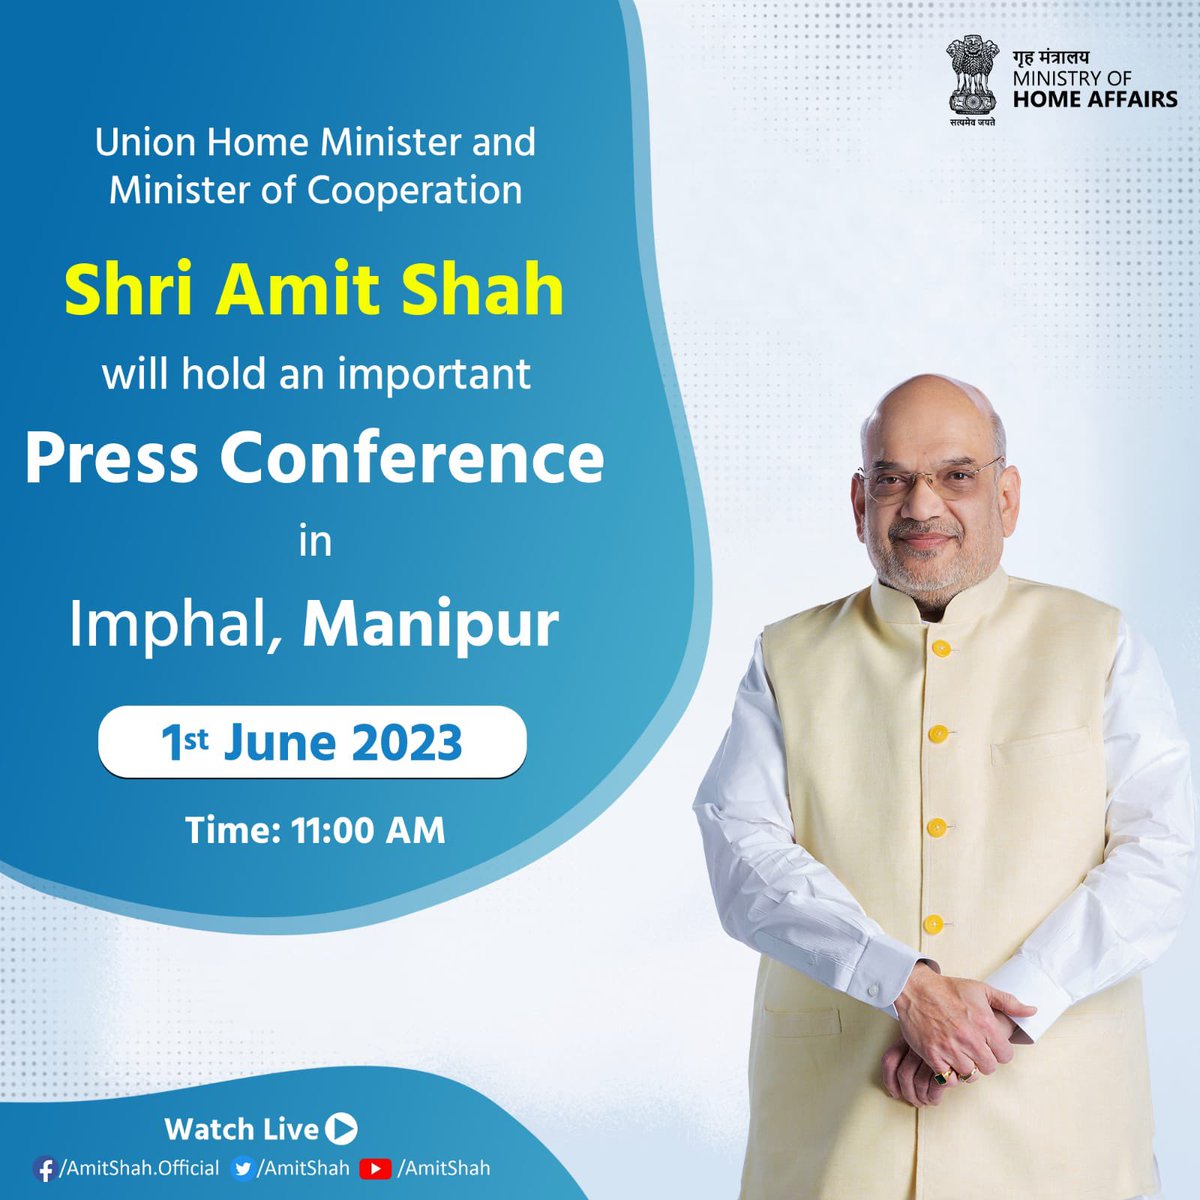 Union Home Minister and Minister of Cooperation Shri @AmitShah will hold an important press conference in Imphal, tomorrow at 11 AM.